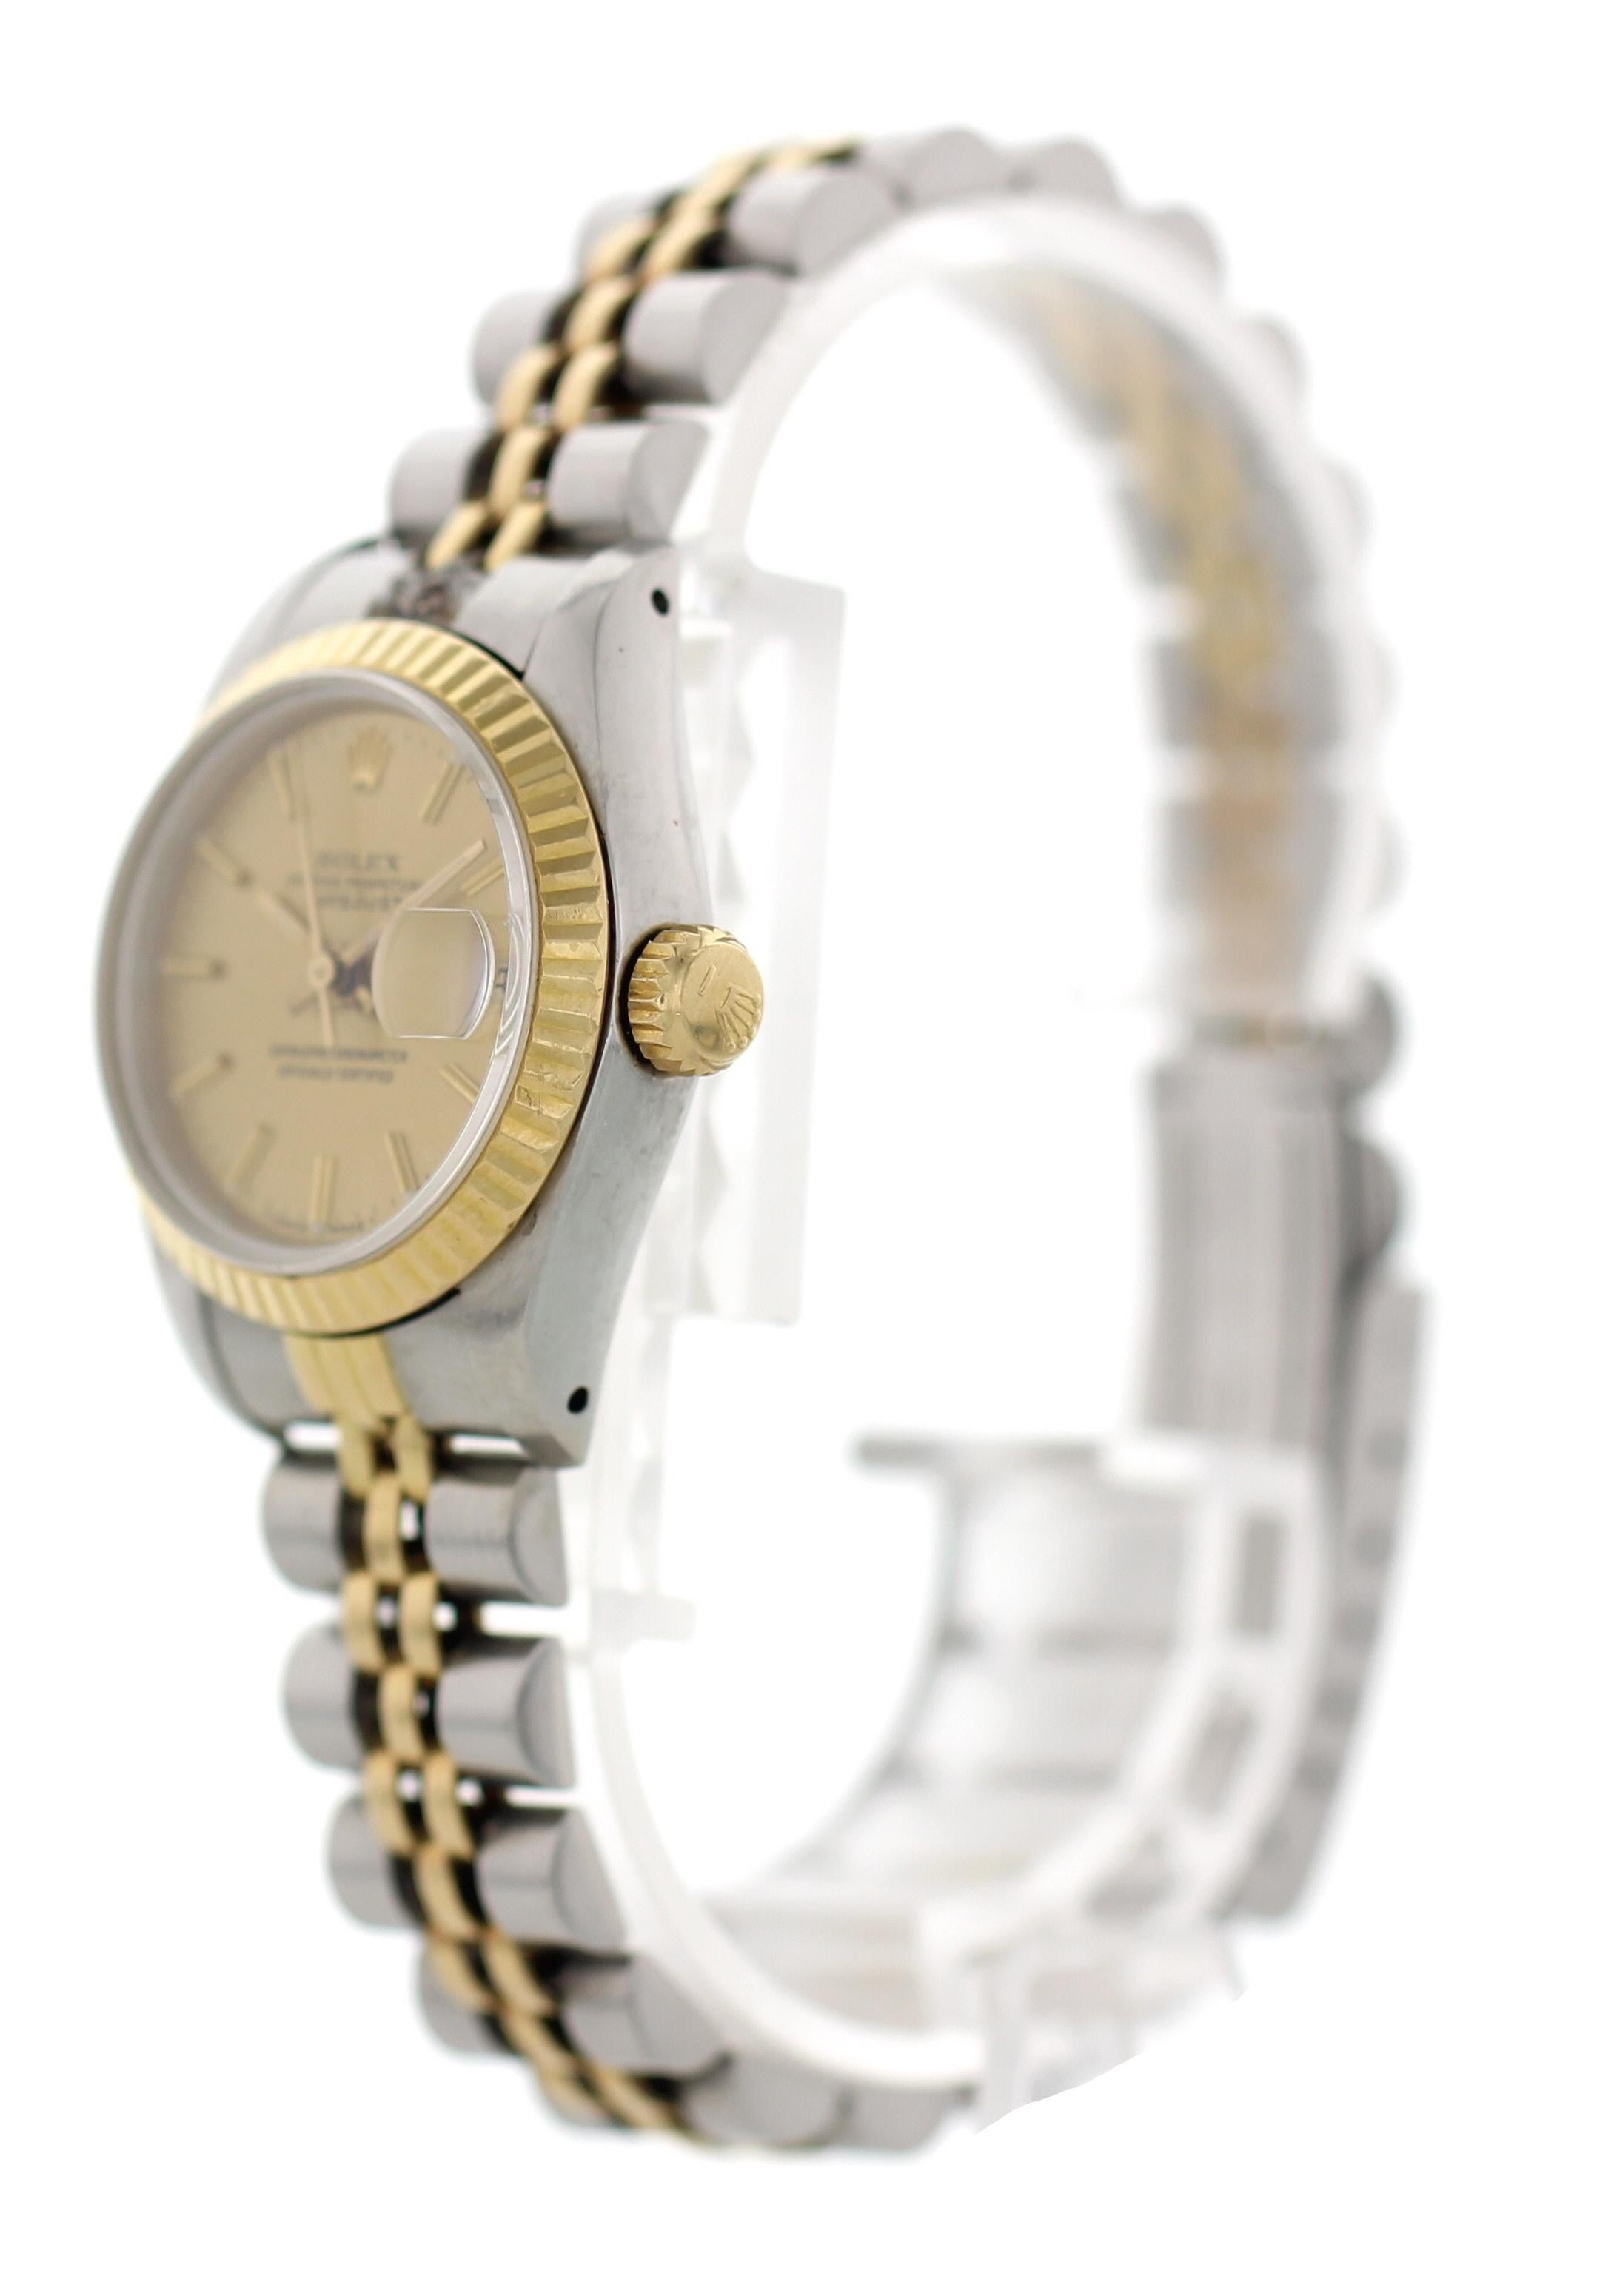 Rolex Oyster Perpetual Datejust 69173 Ladies Watch In Excellent Condition For Sale In New York, NY